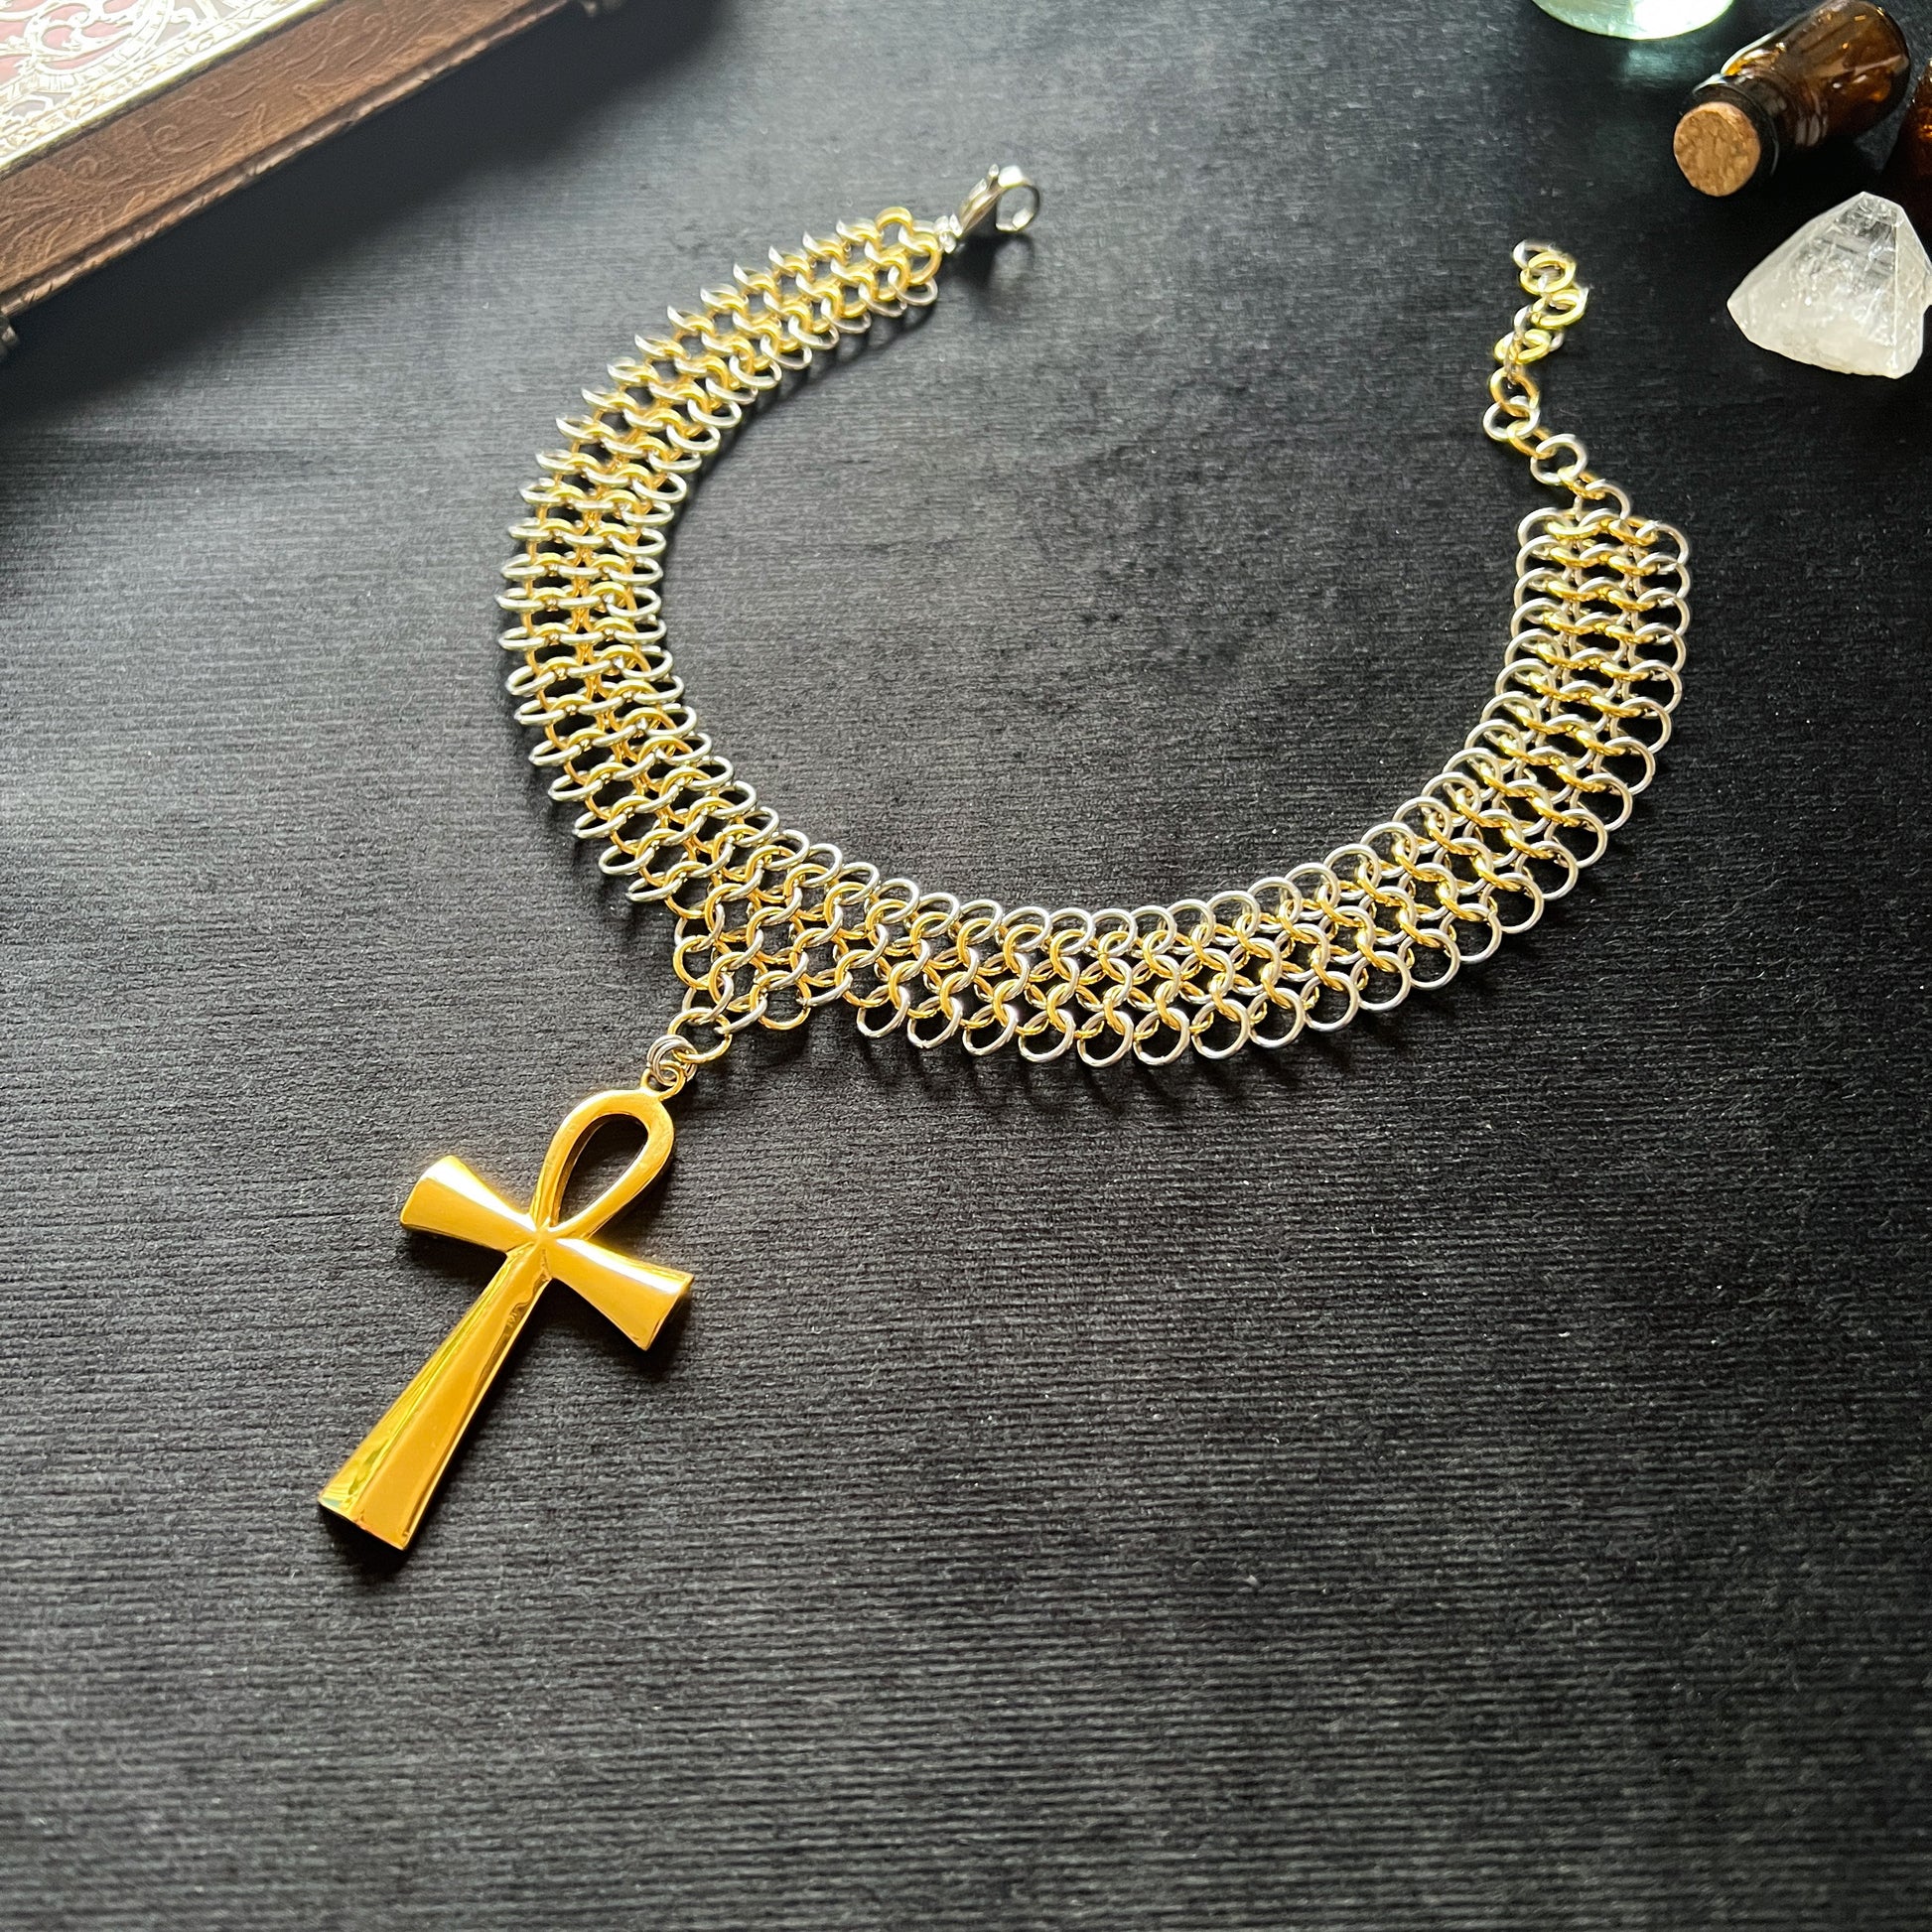 Ankh chainmail choker European 4 in 1 stainless steel and 18k gold plated necklace Baguette Magick